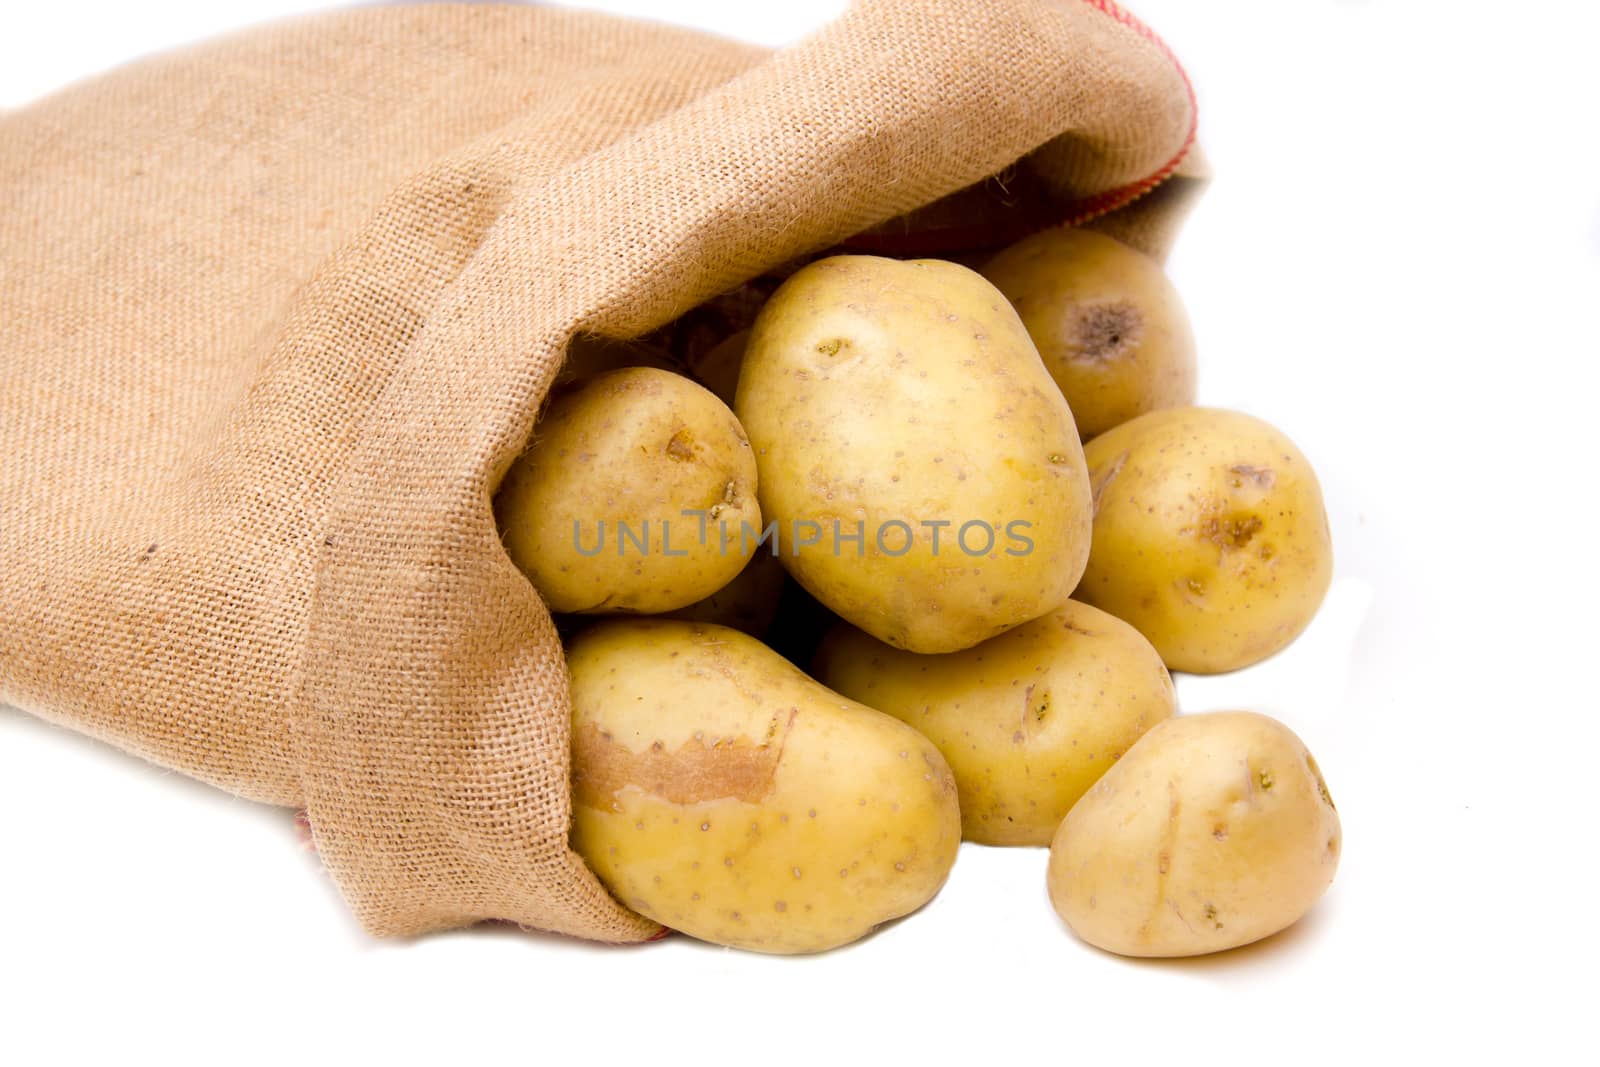 Sack of potatoes by spafra